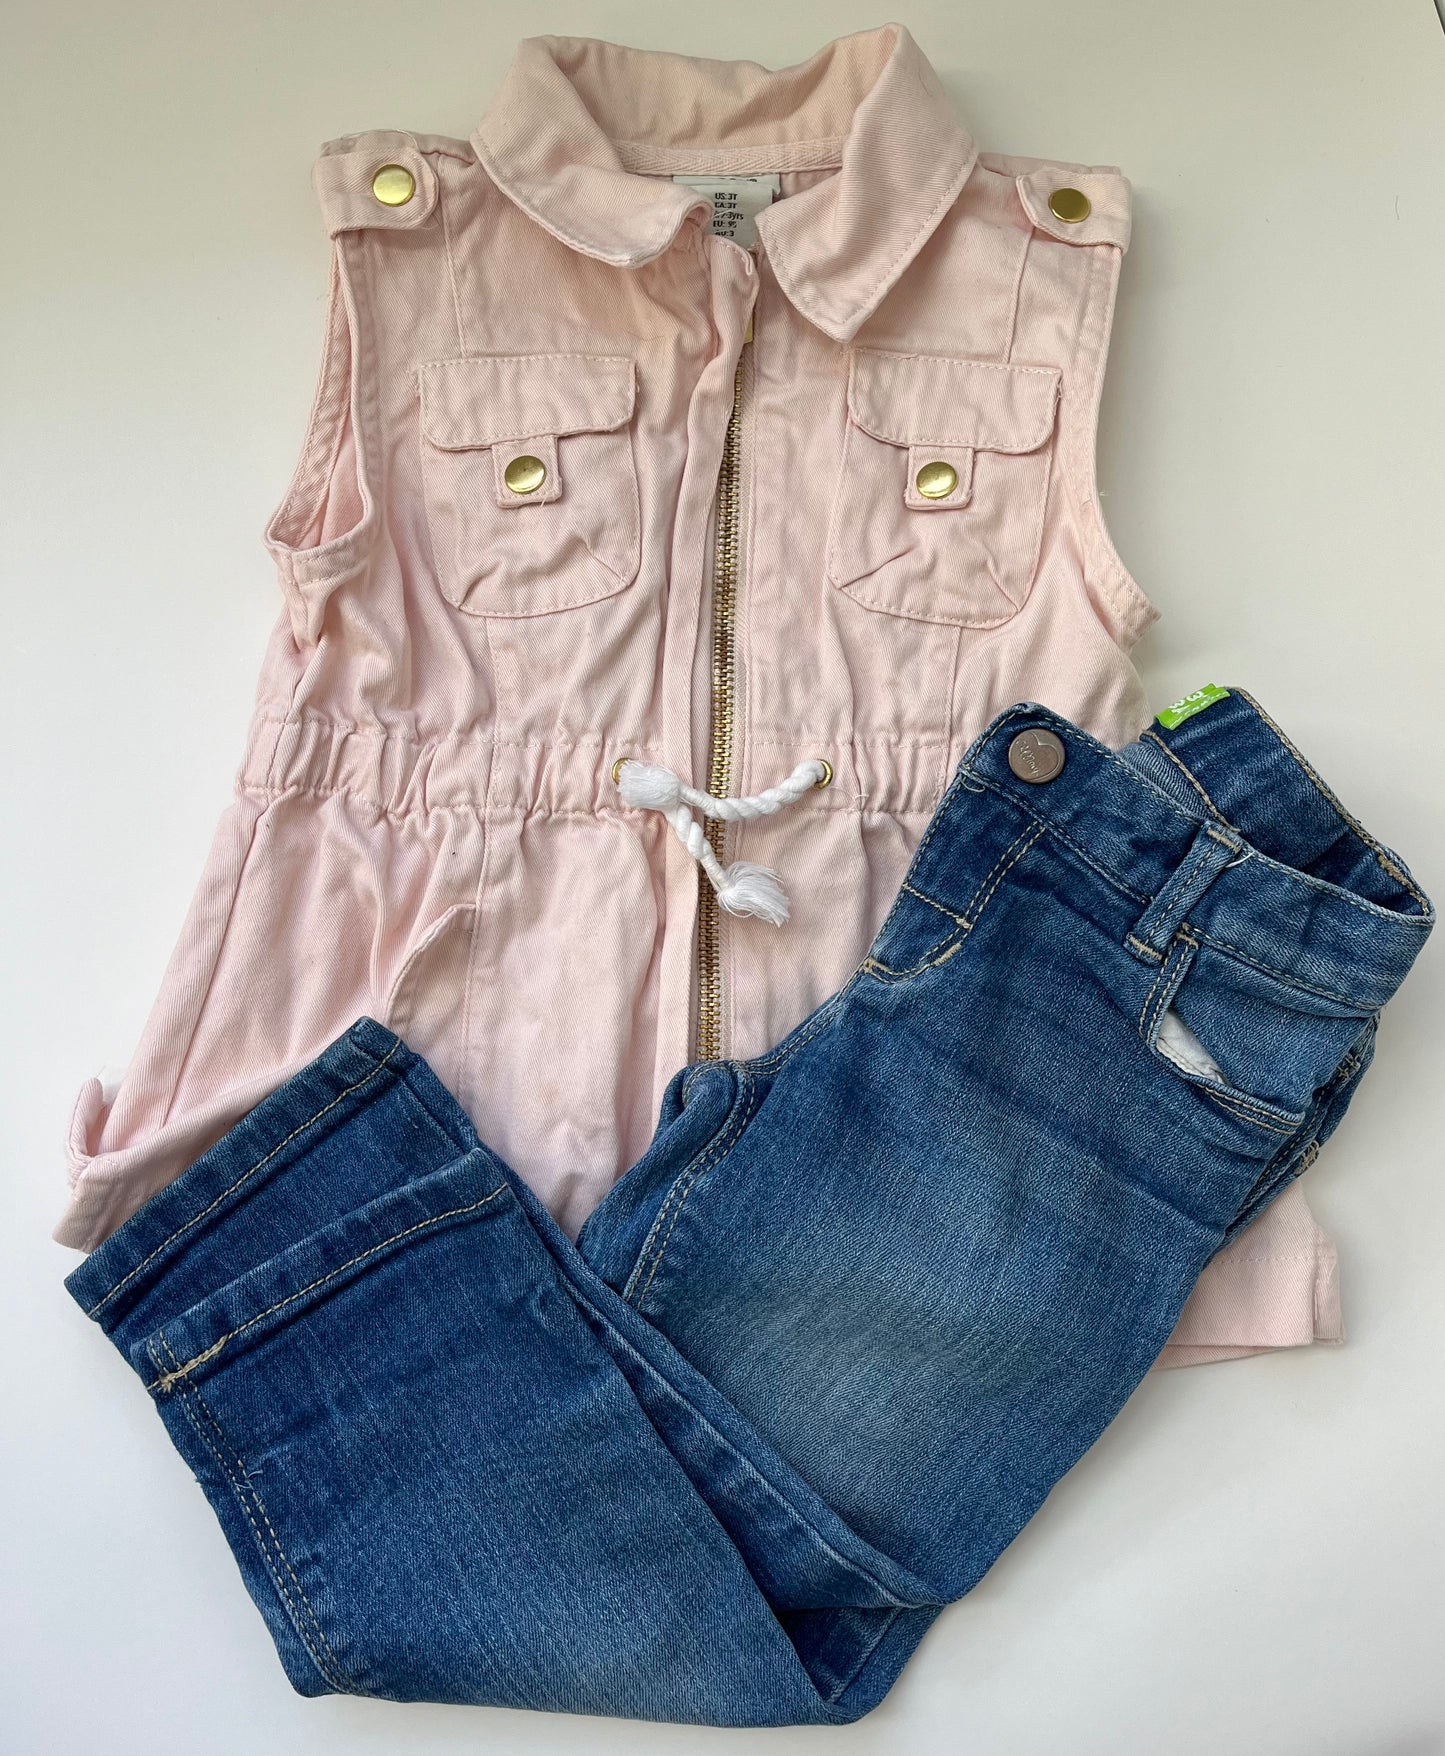 Girls 3T vest & jeans outfit (45244)